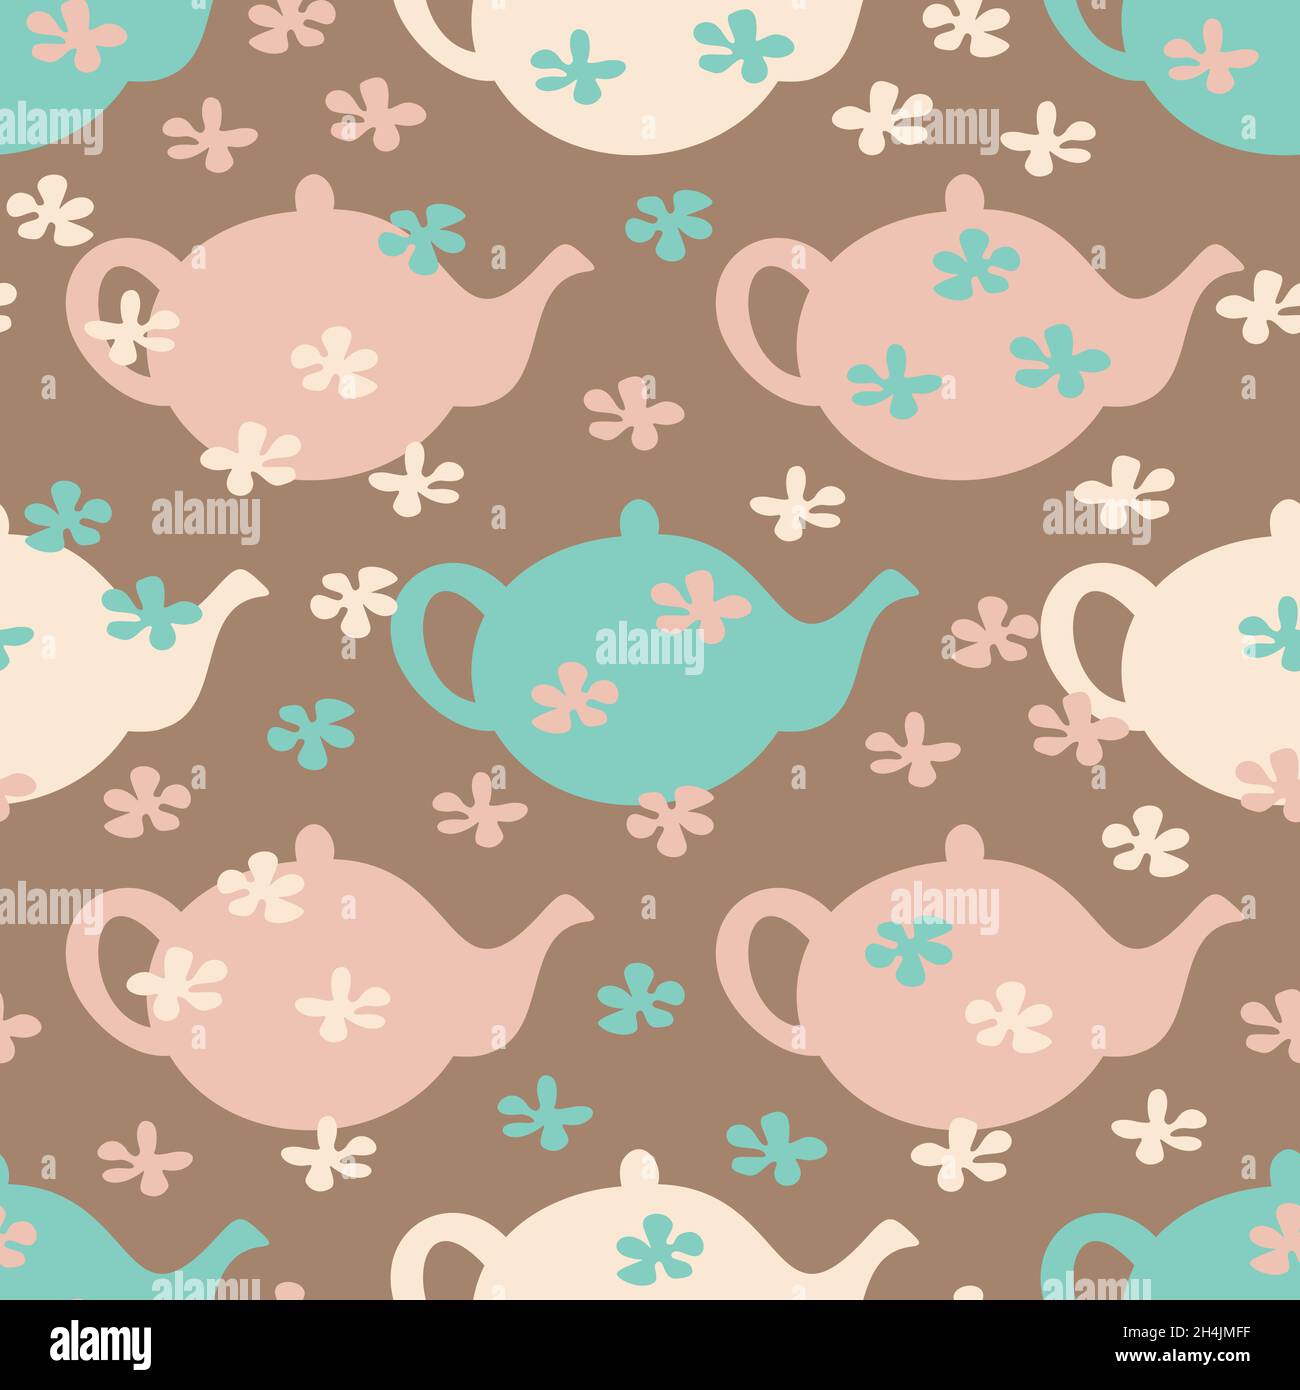 Vector seamless pattern with silhouettes of teapots and flowers. Cute design for teatime. Stock Vector